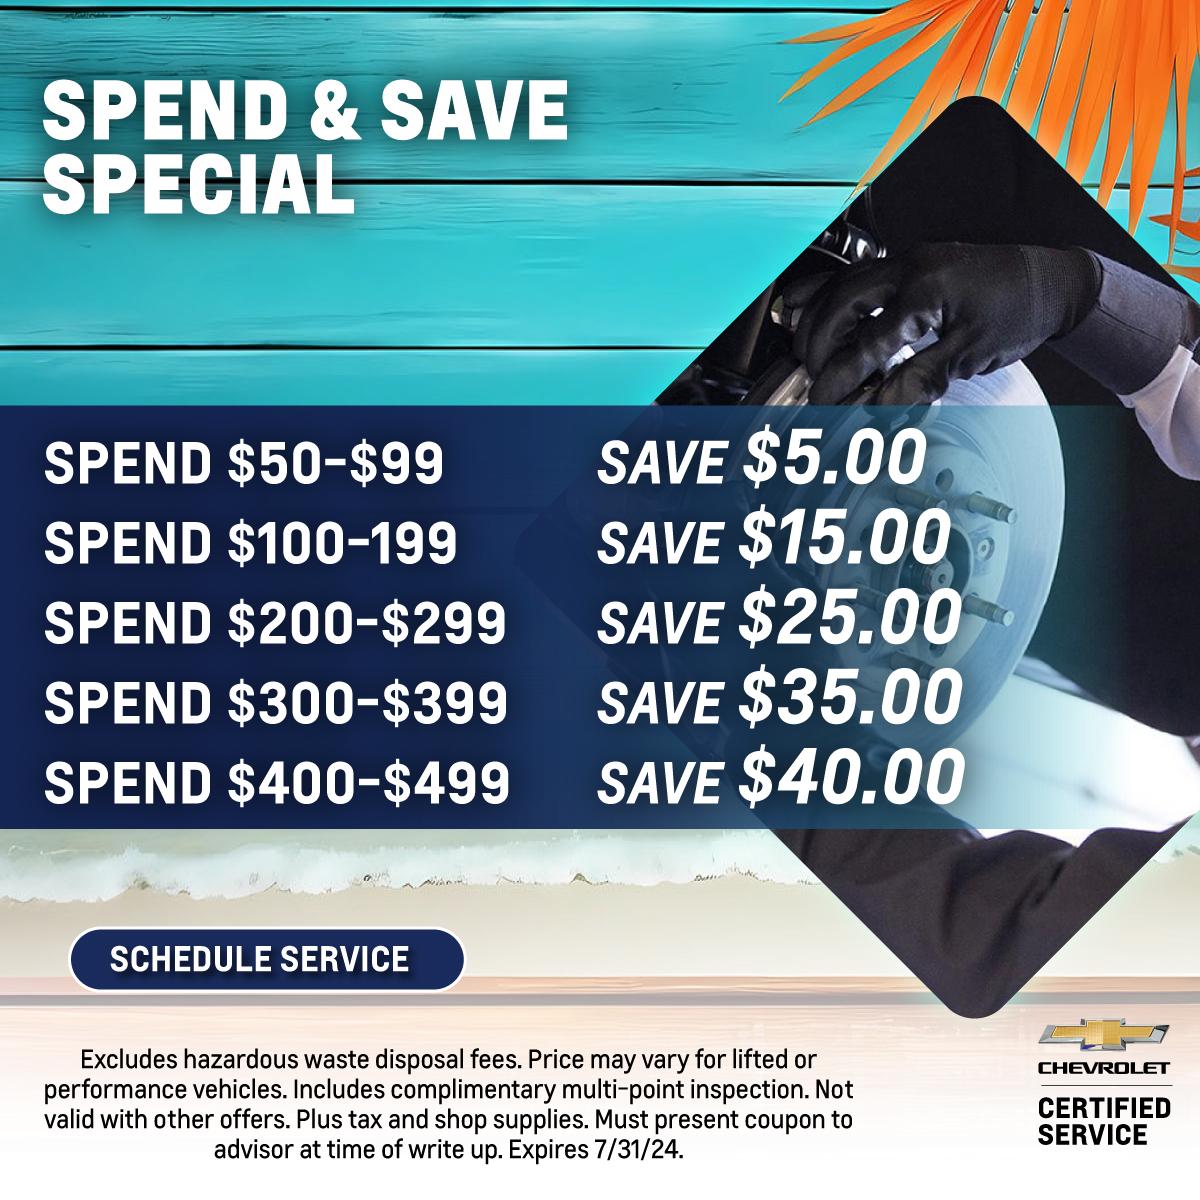 Spend and save special